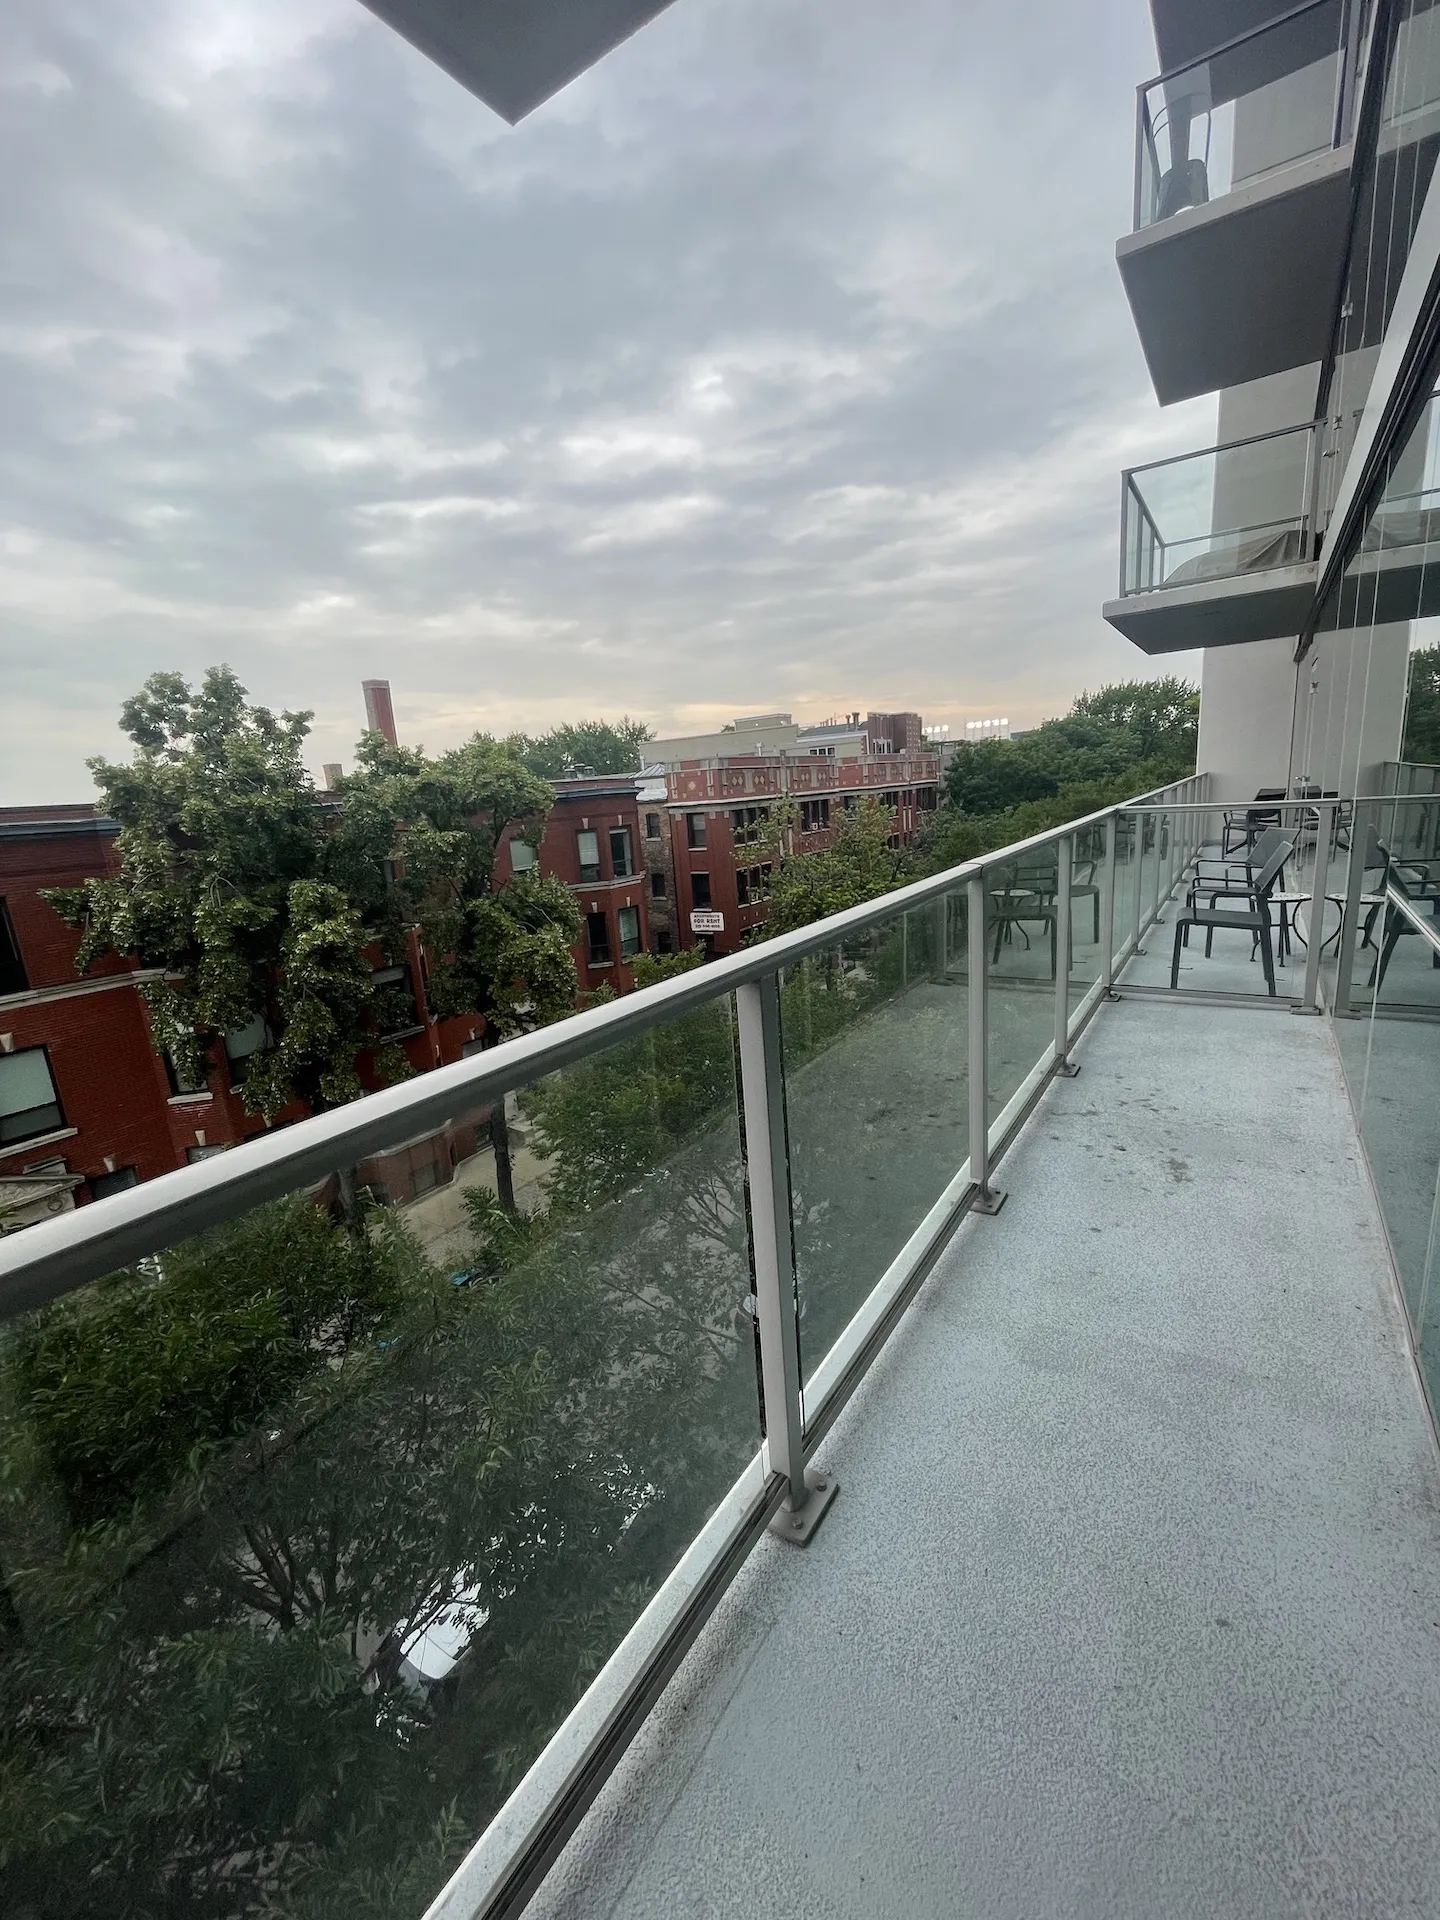 3740 N HALSTED ST 60613-unit#515-Chicago-IL